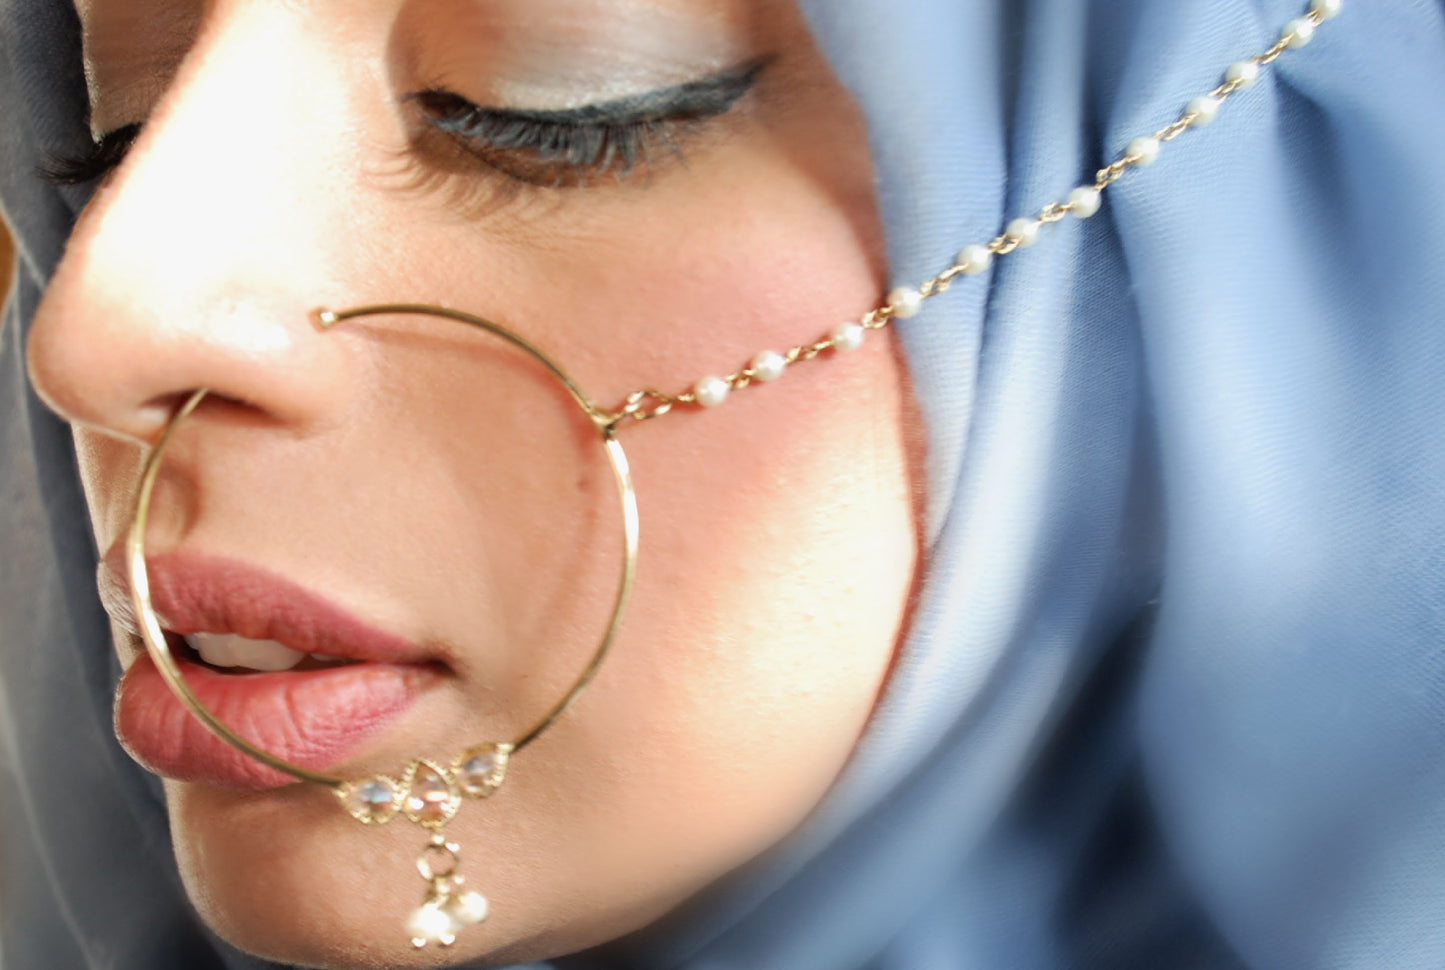 Large Pearly Nose Ring with Chain (Nath)